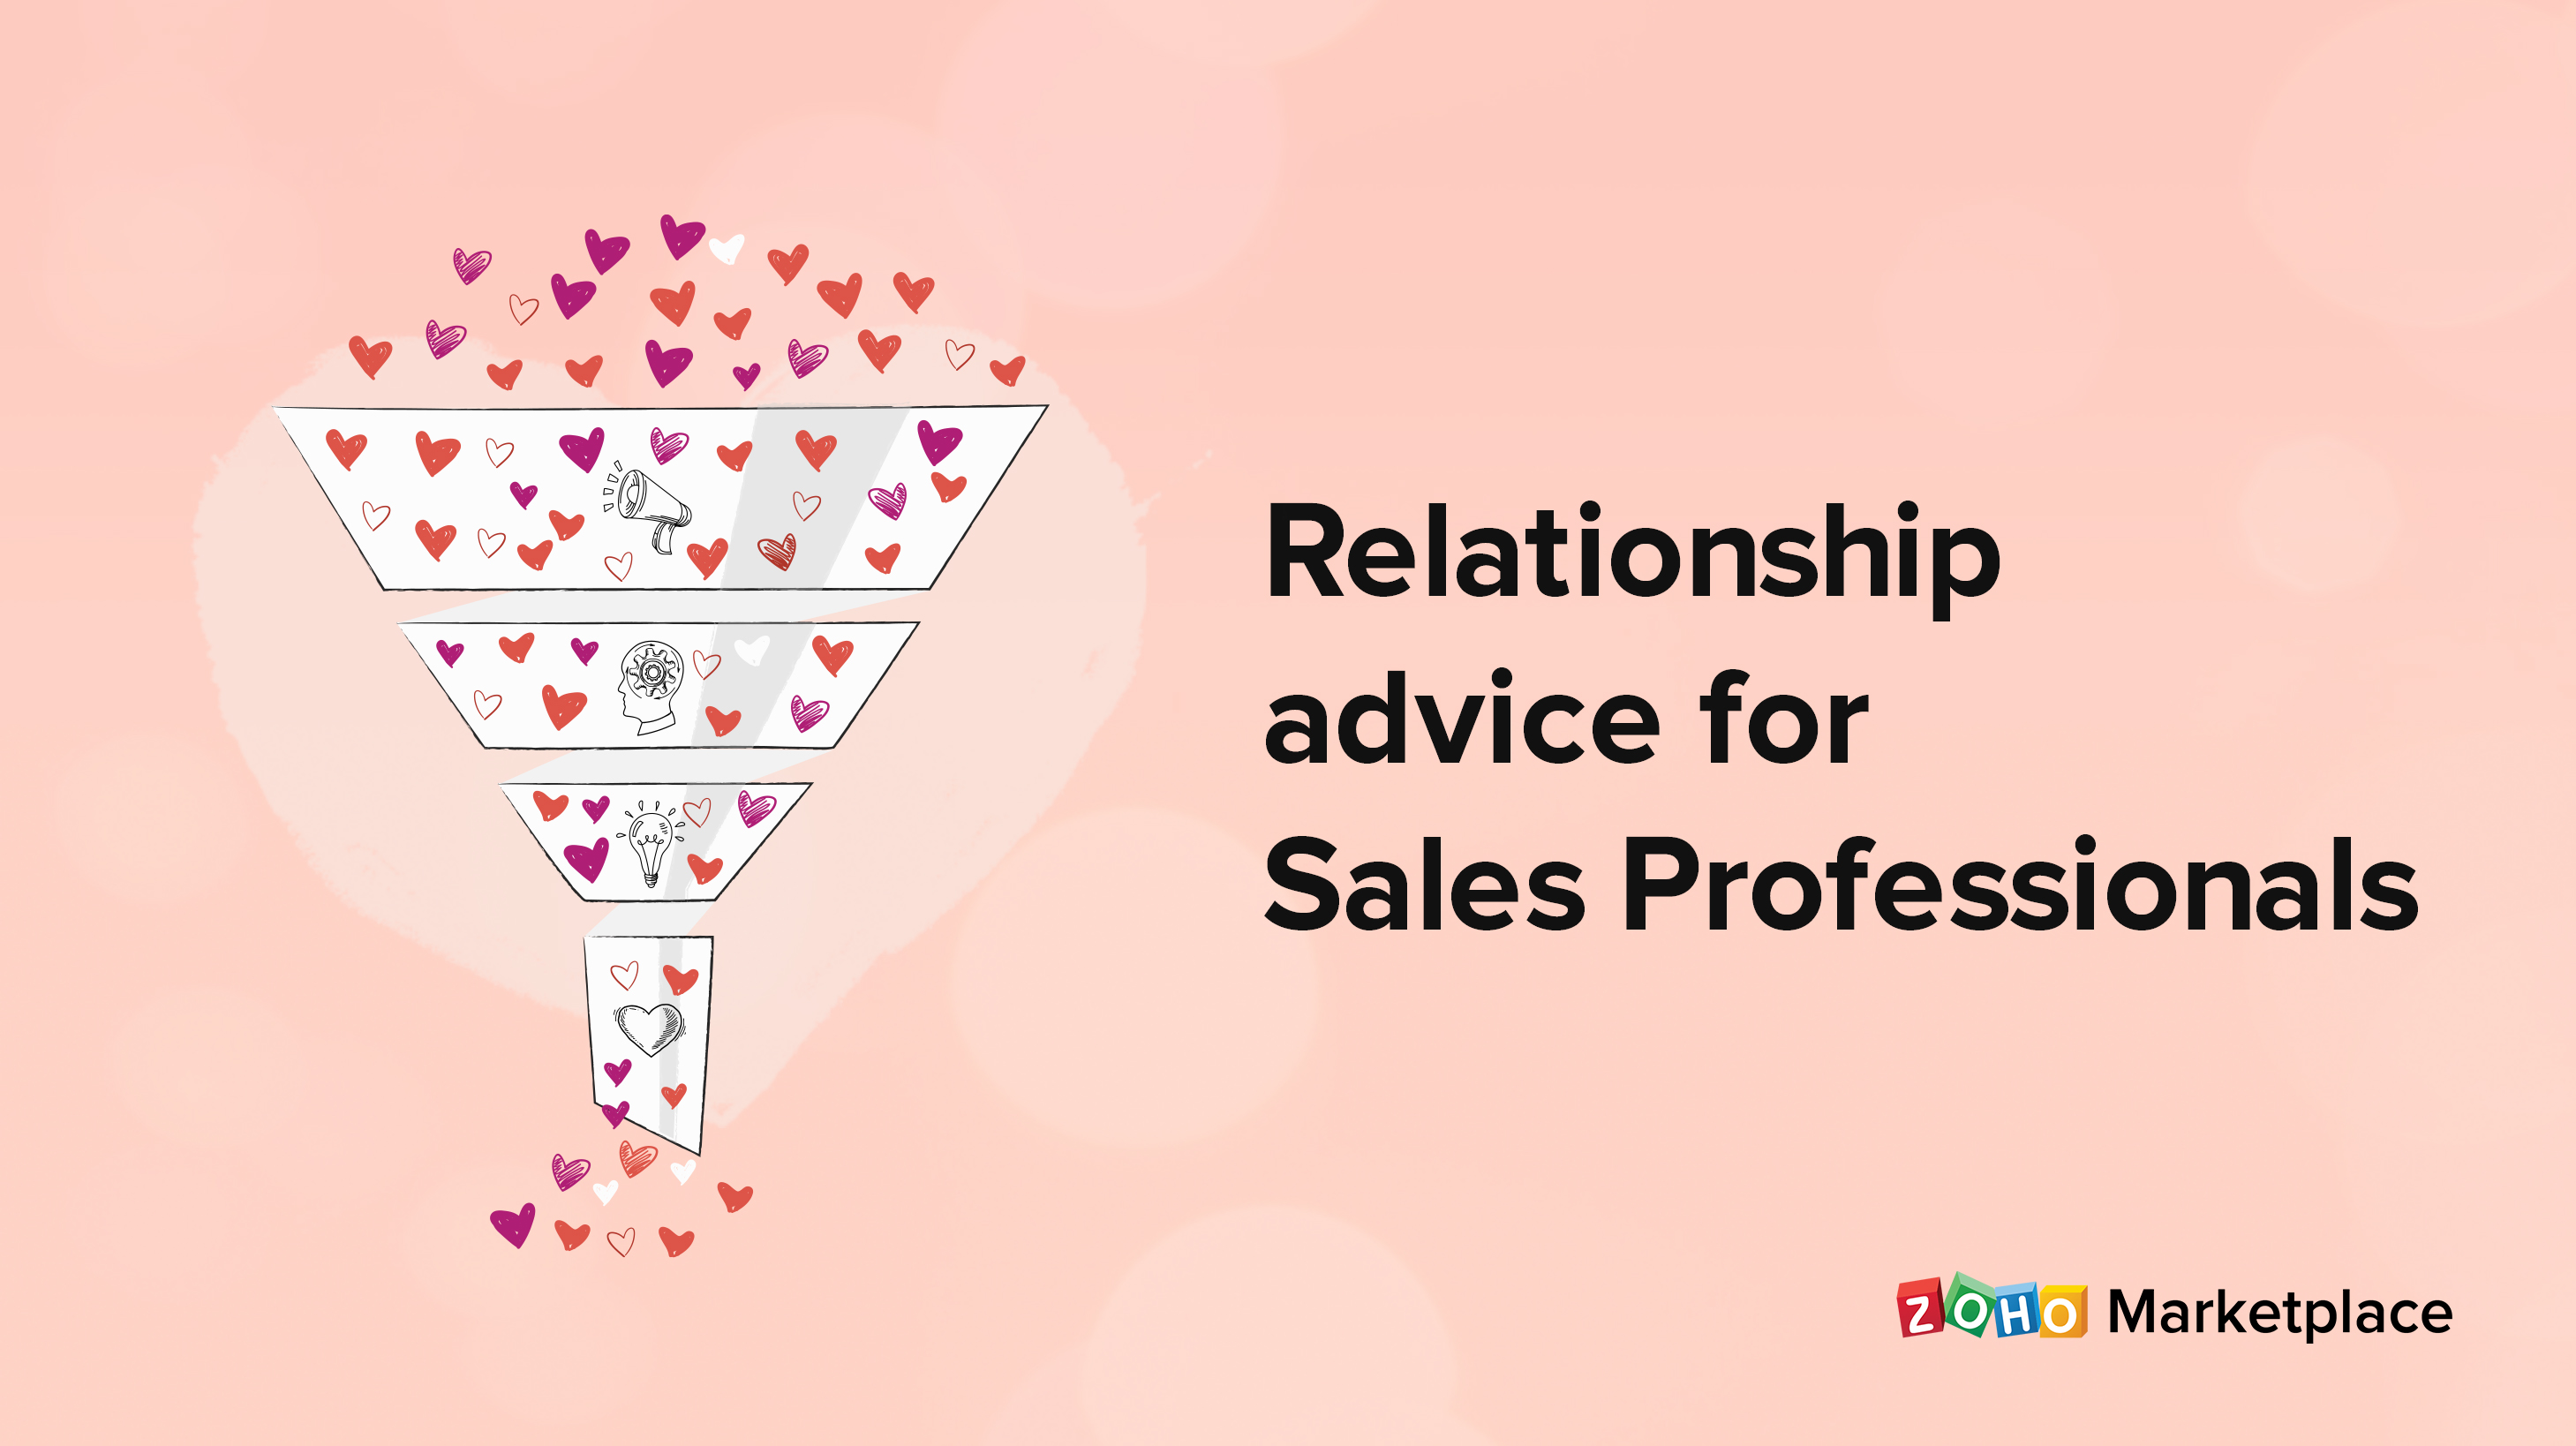 Relationship advice for Sales Professionals